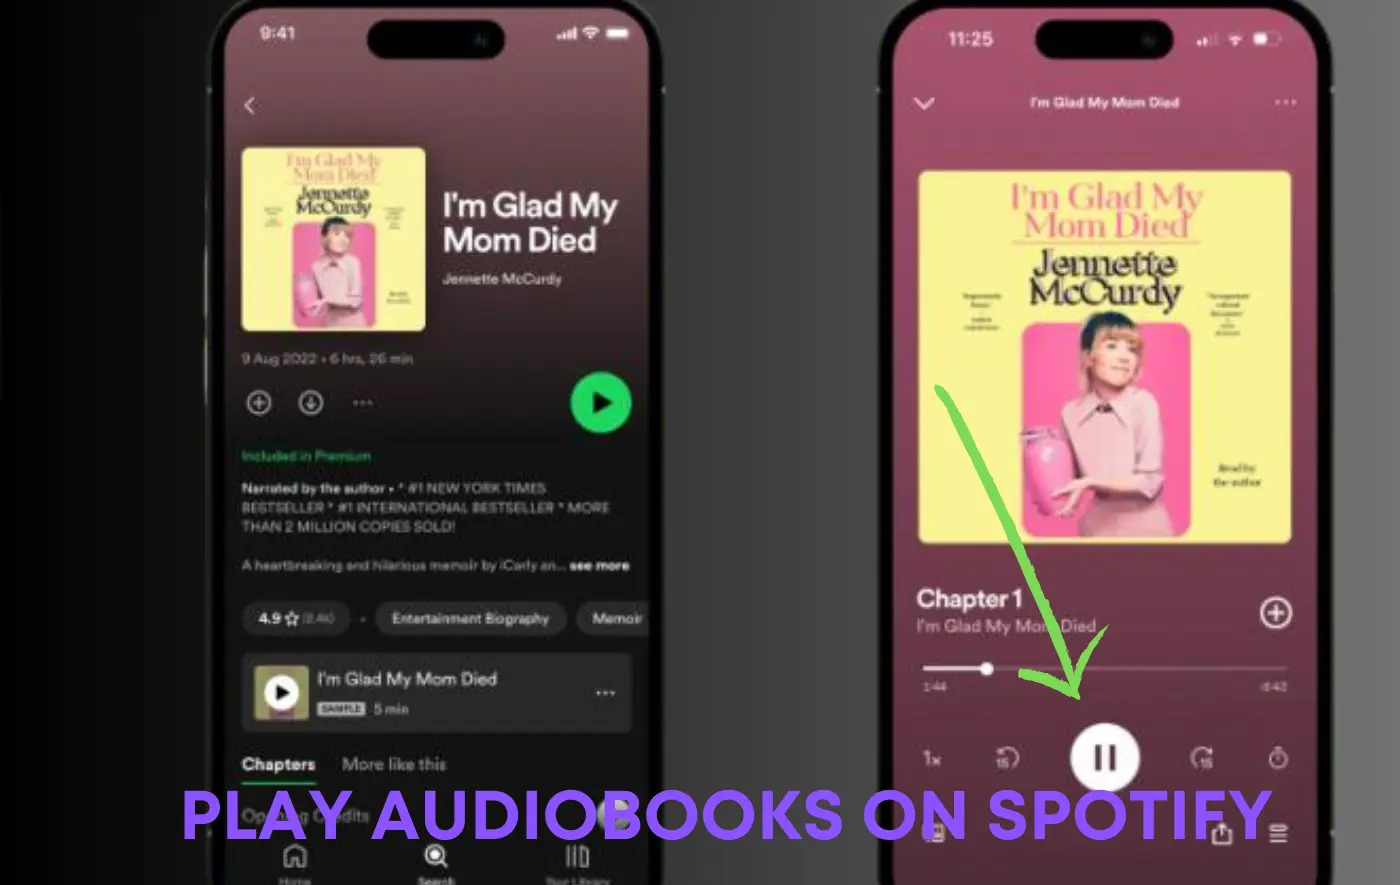 how to purchase audiobooks on Spotify and play how?